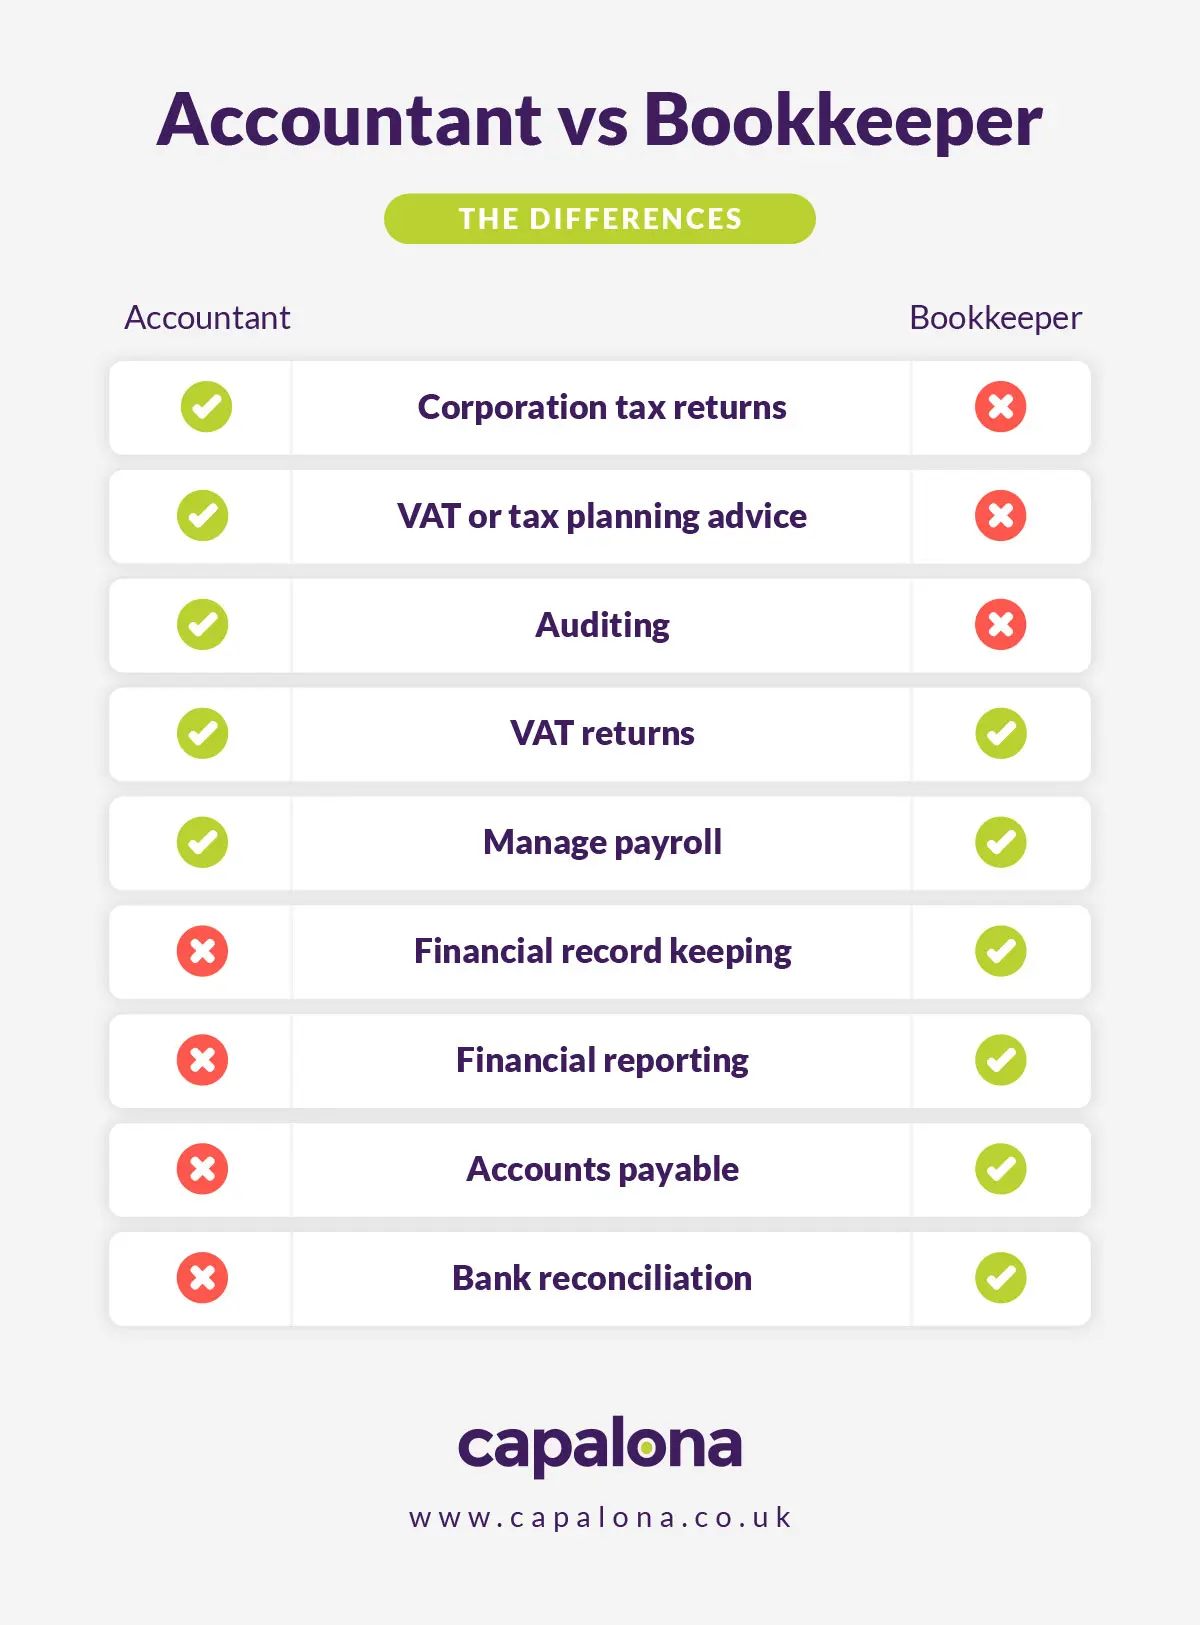 Accountant vs Bookkeeper - what's the difference?